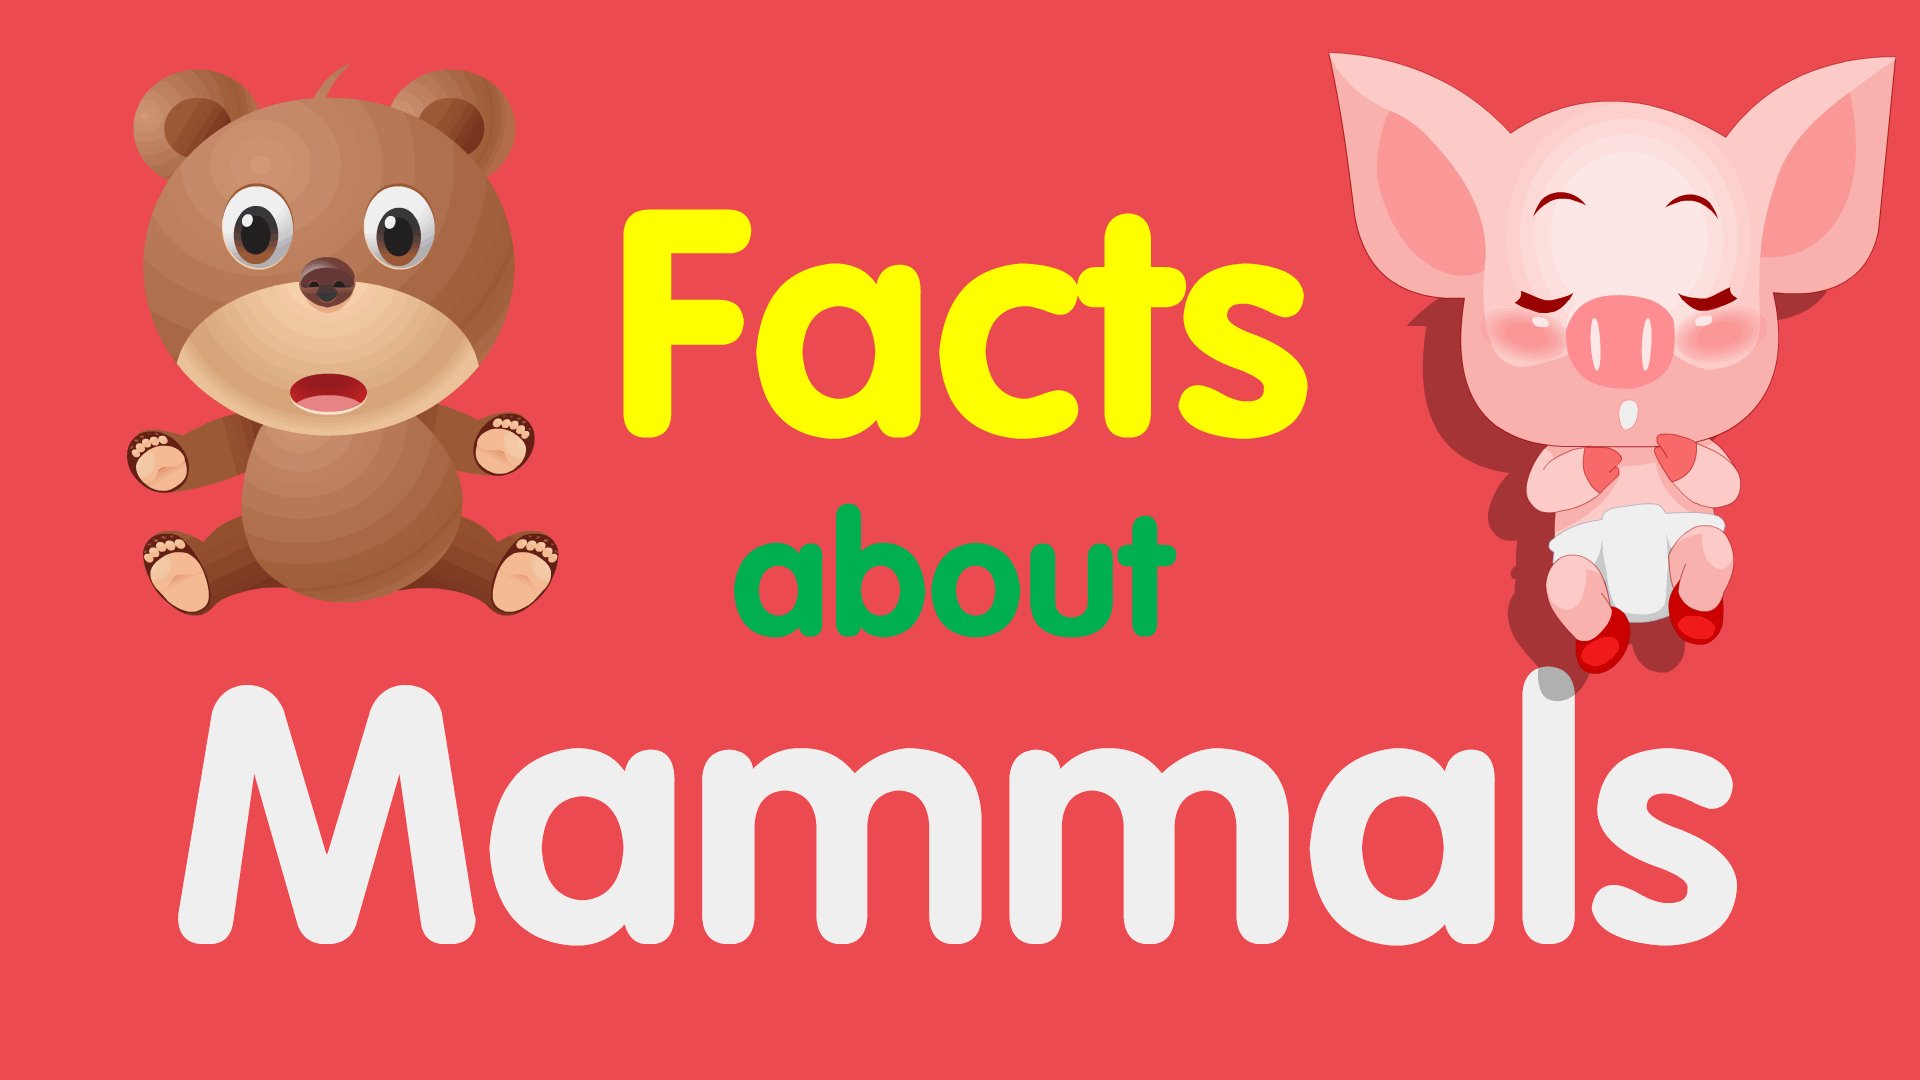 Facts about mammals